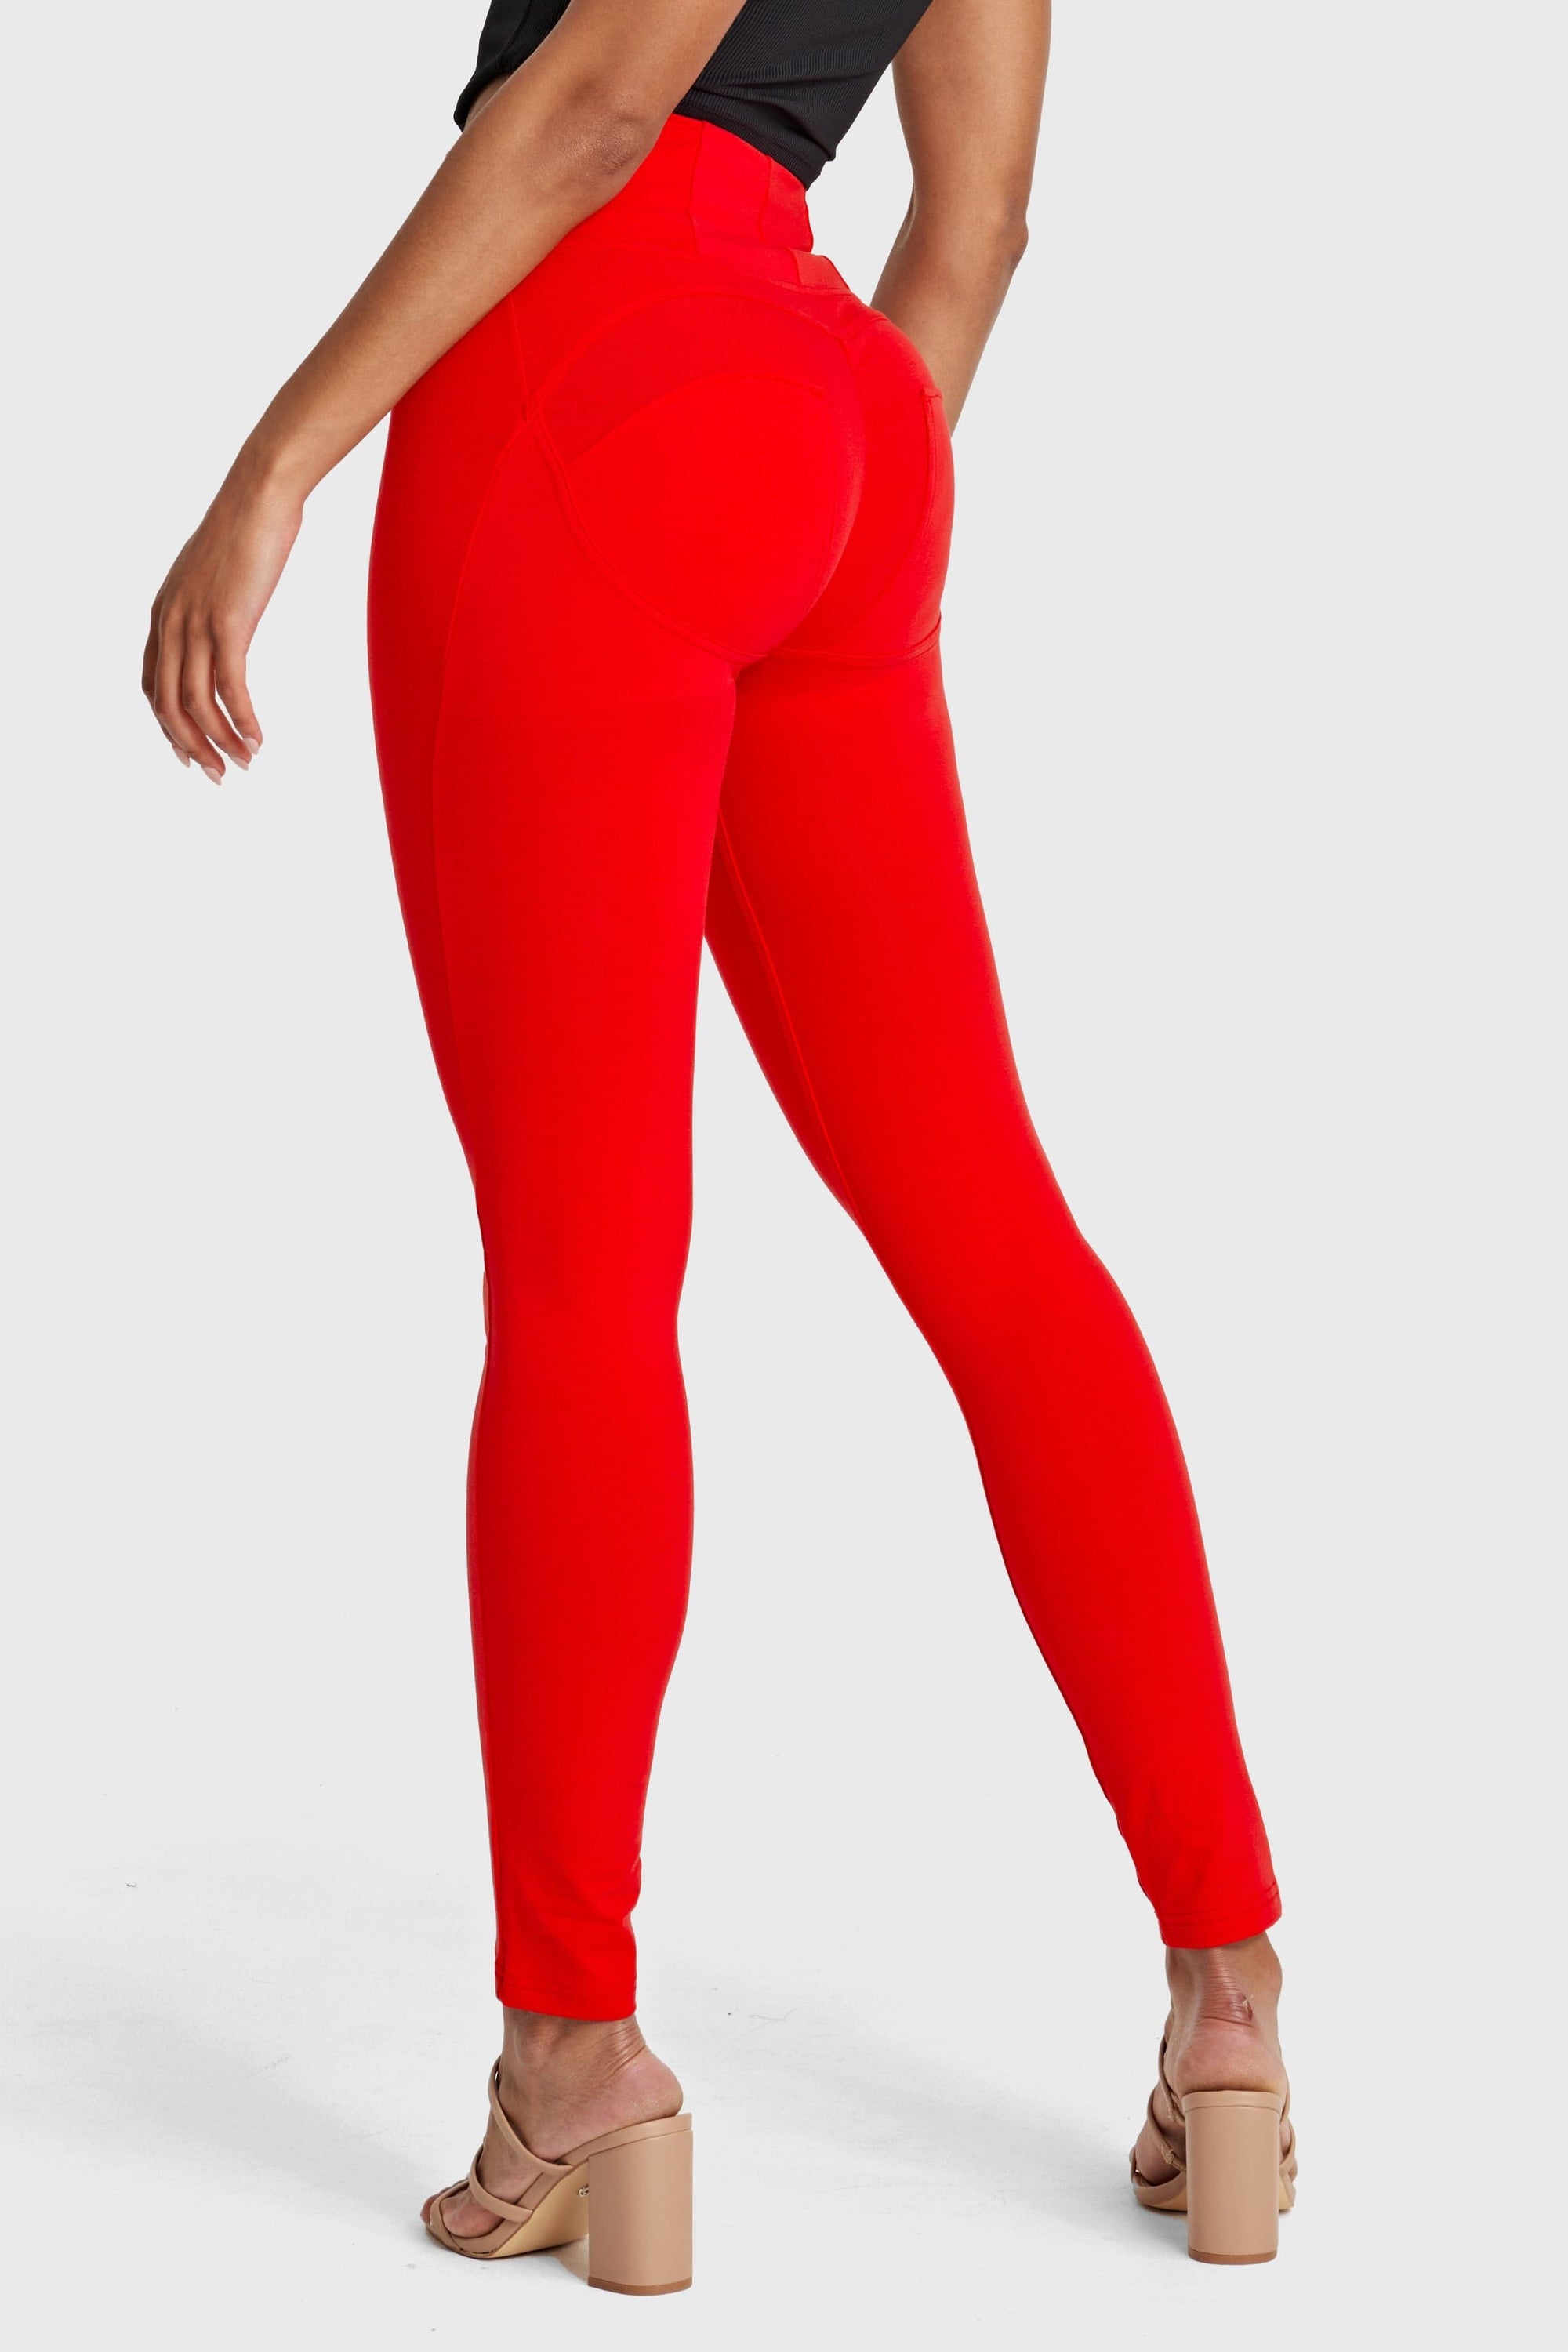 WR.UP® Fashion - High Waisted - Full Length - Red 10